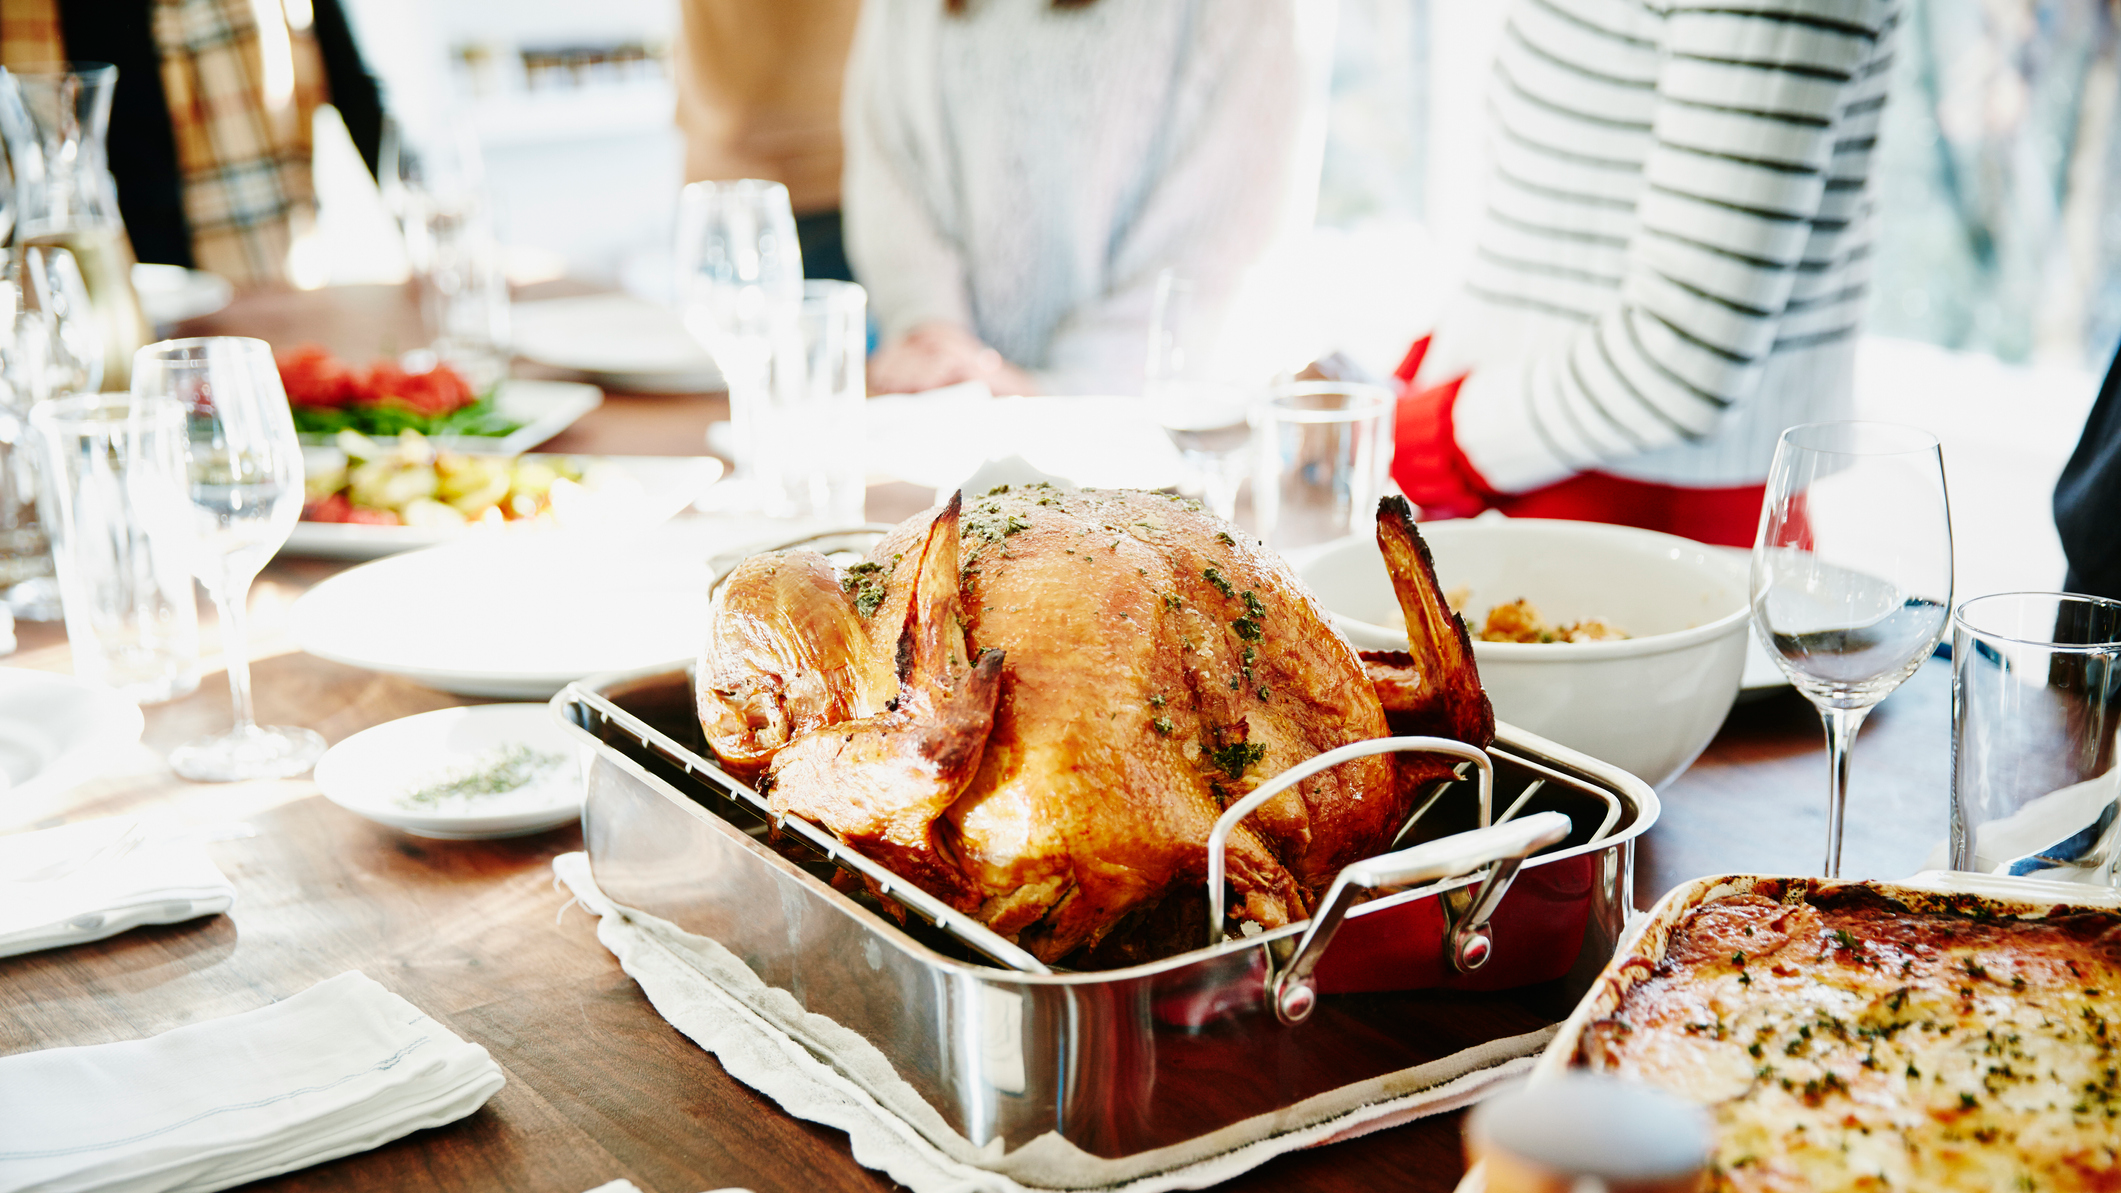 Thanksgiving turkey: What the CDC says not to do before cooking a